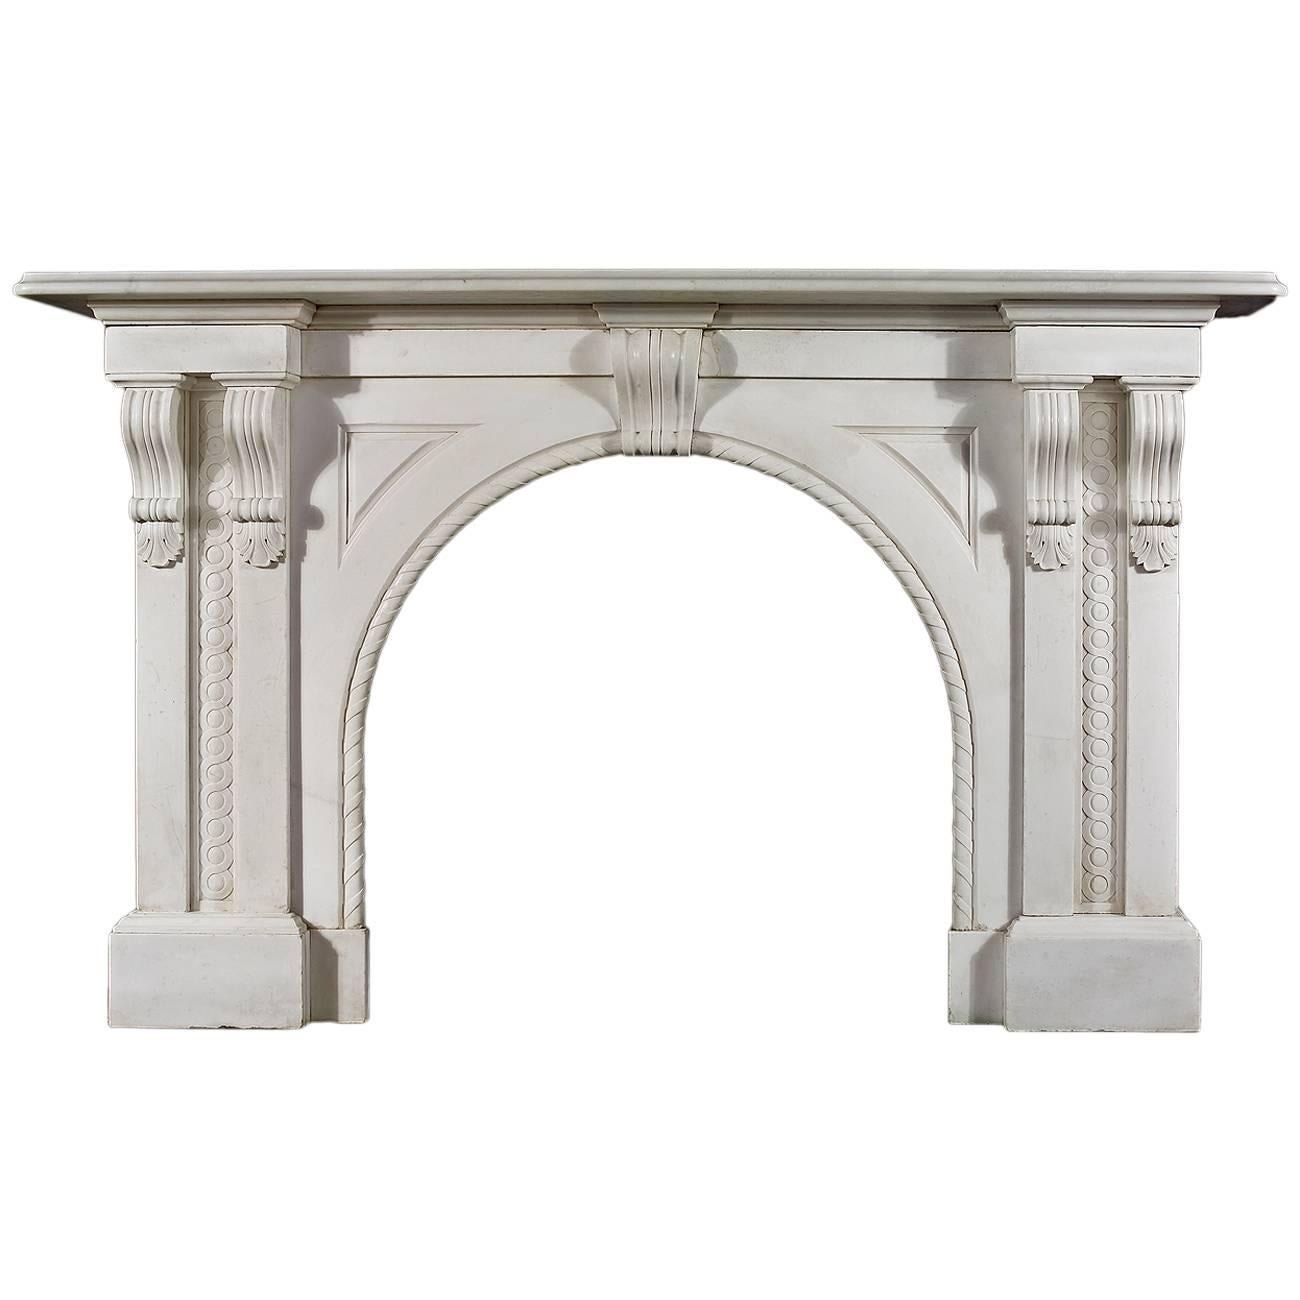 Antique White Statuary Marble Victorian Arched Fireplace Mantel